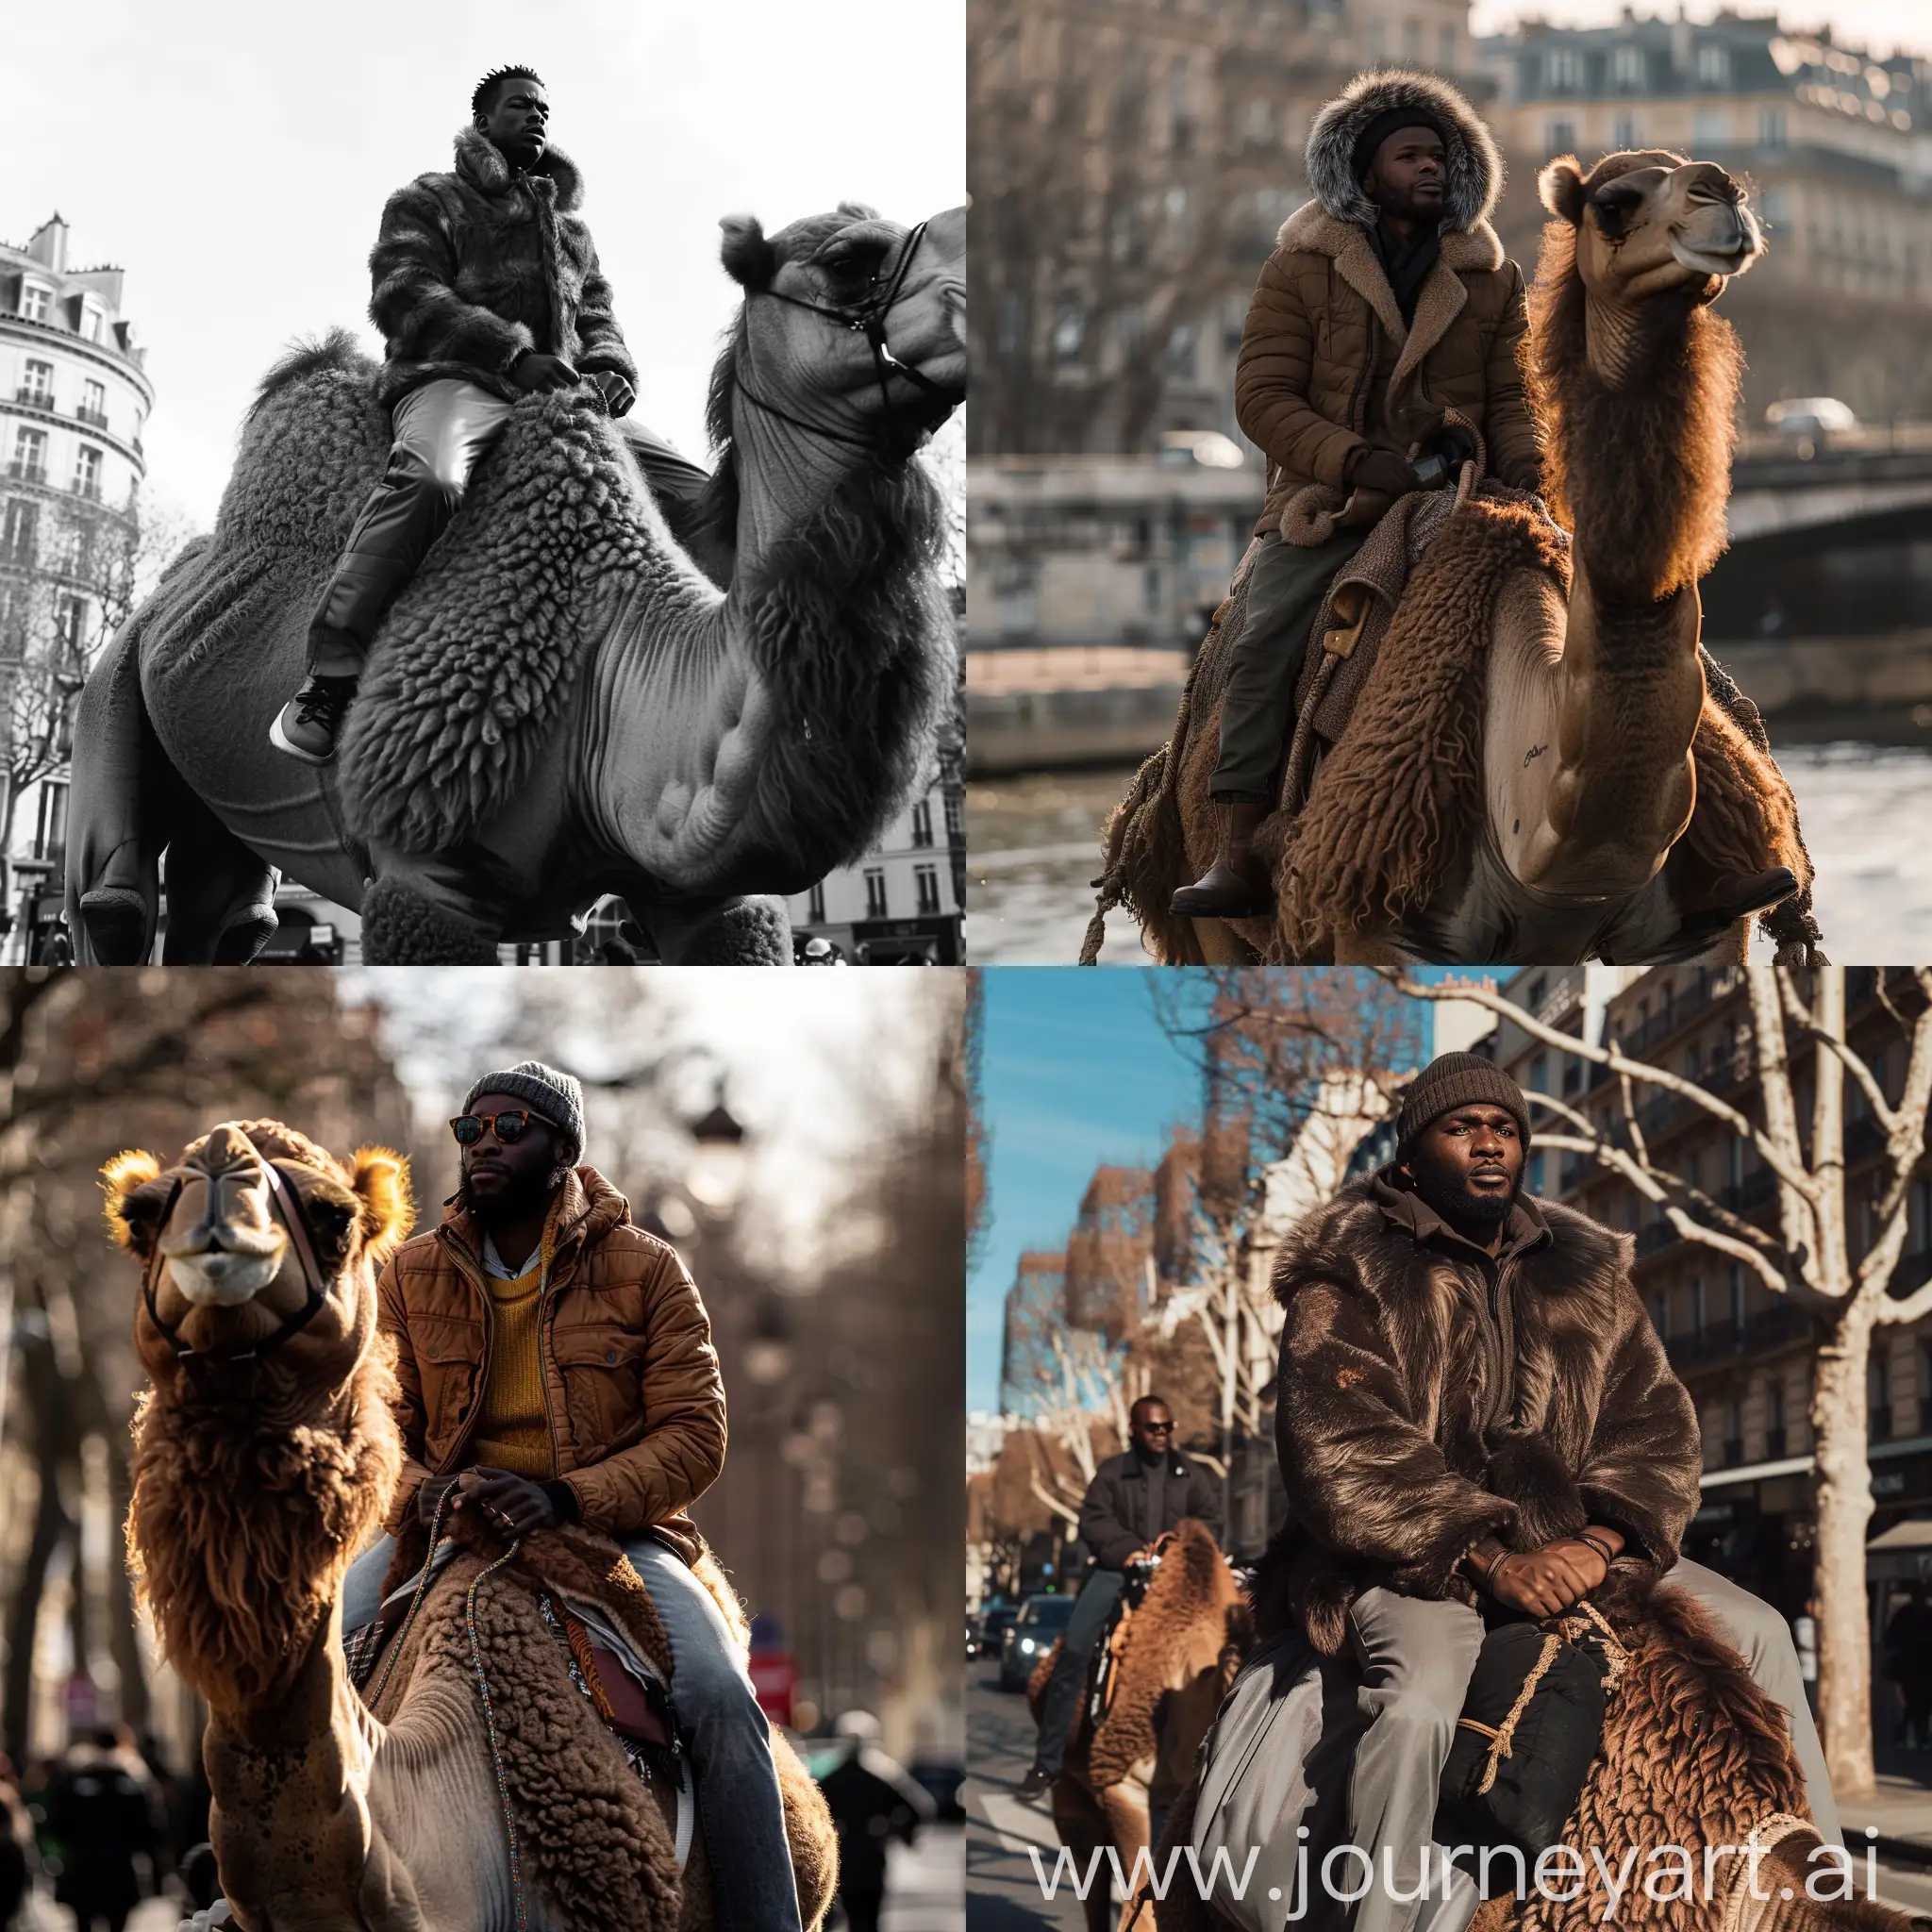 Elon-Mack-Riding-Camel-in-Paris-Captured-on-Canon-R6-Mark-II-with-35mm-Lens